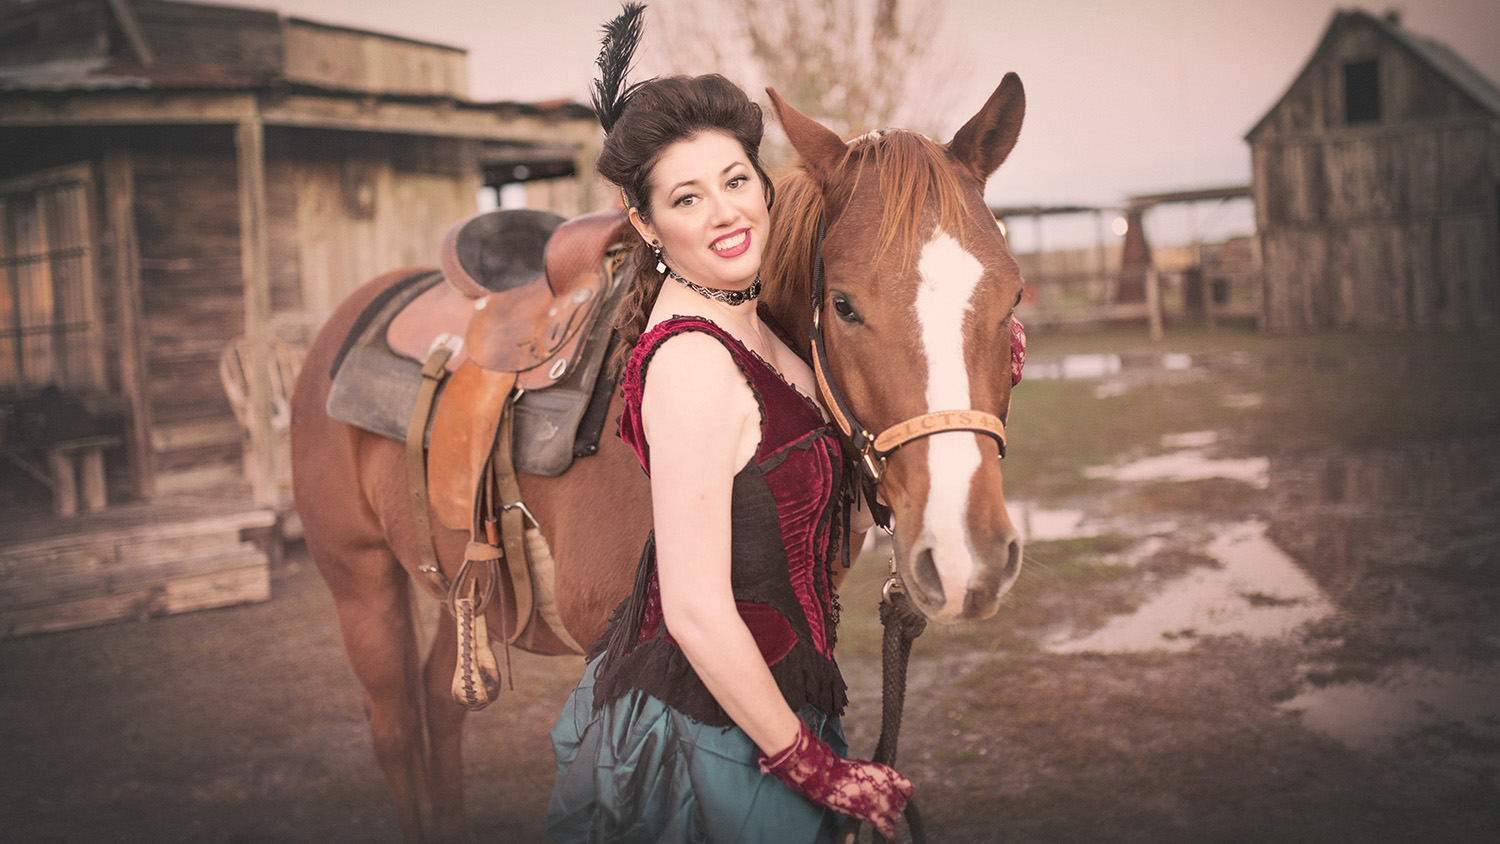 showgirl portrait with horse Old Western